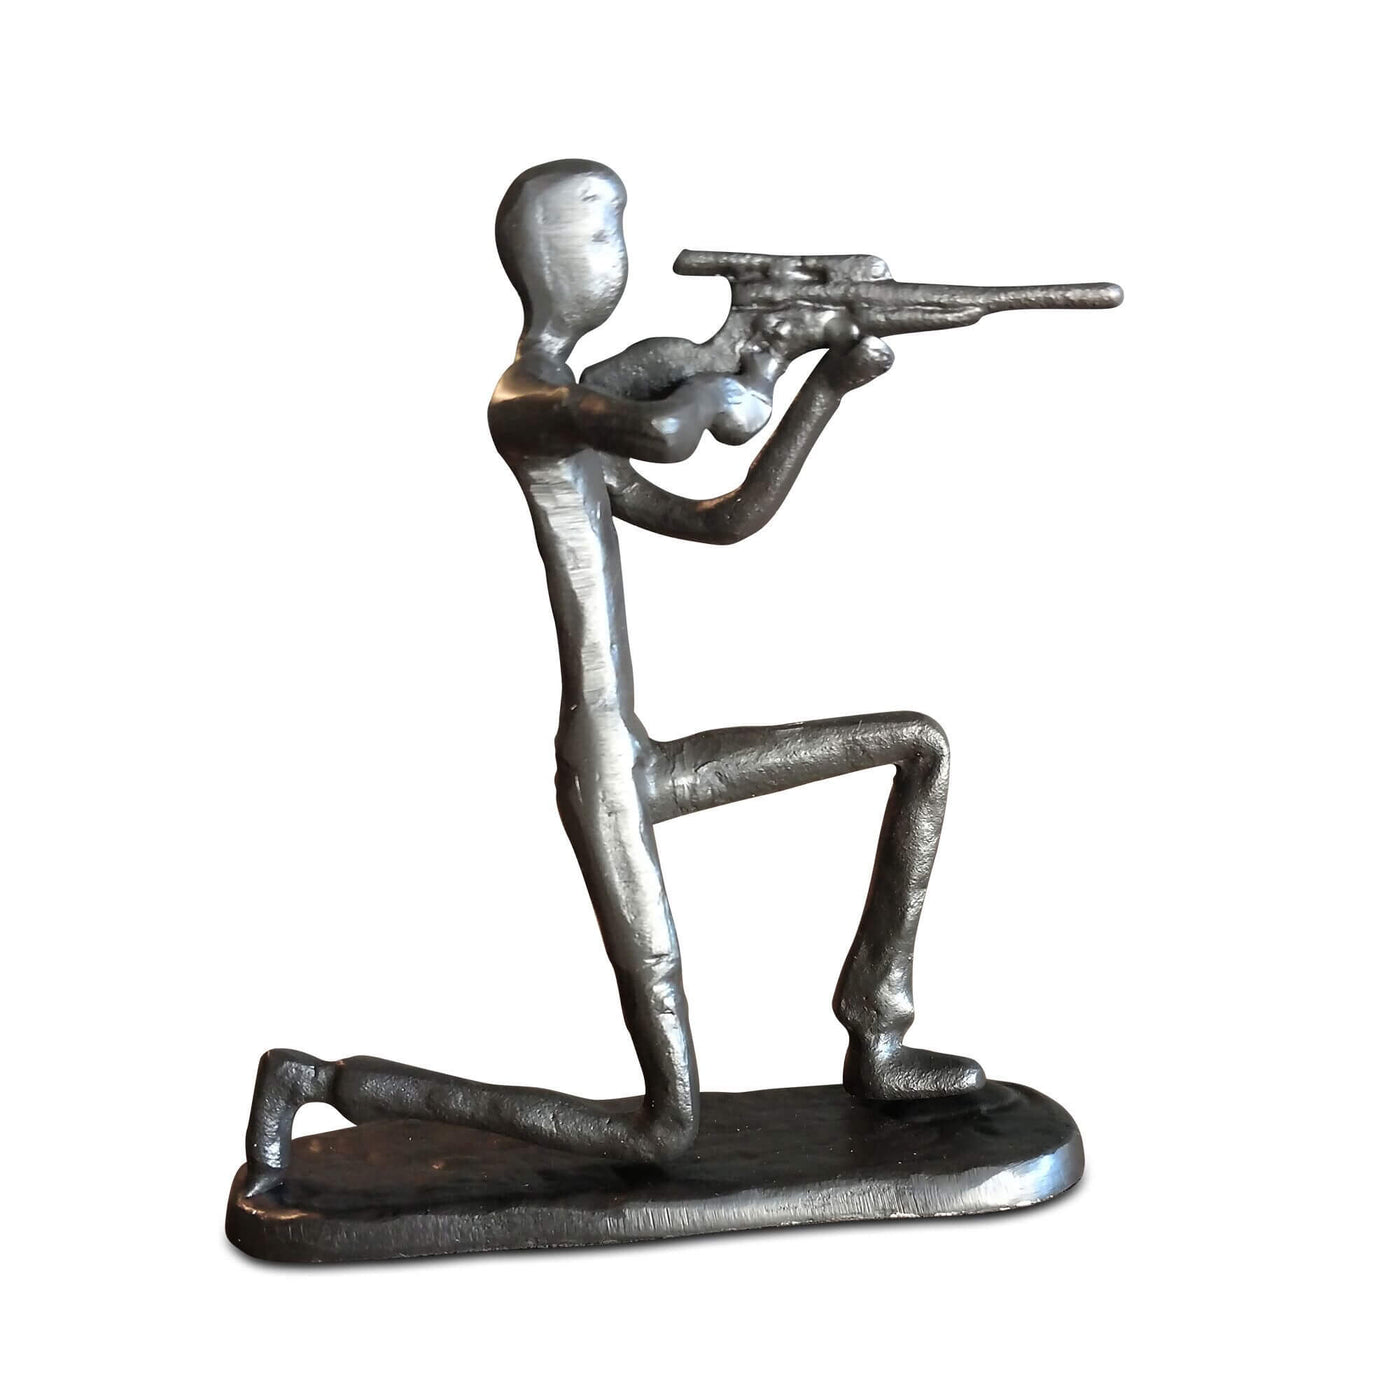 Rifleman Hunter Shooter Sculpture Figurine - Metal - Cast Iron in partnership with Rustic Deco Incorporated